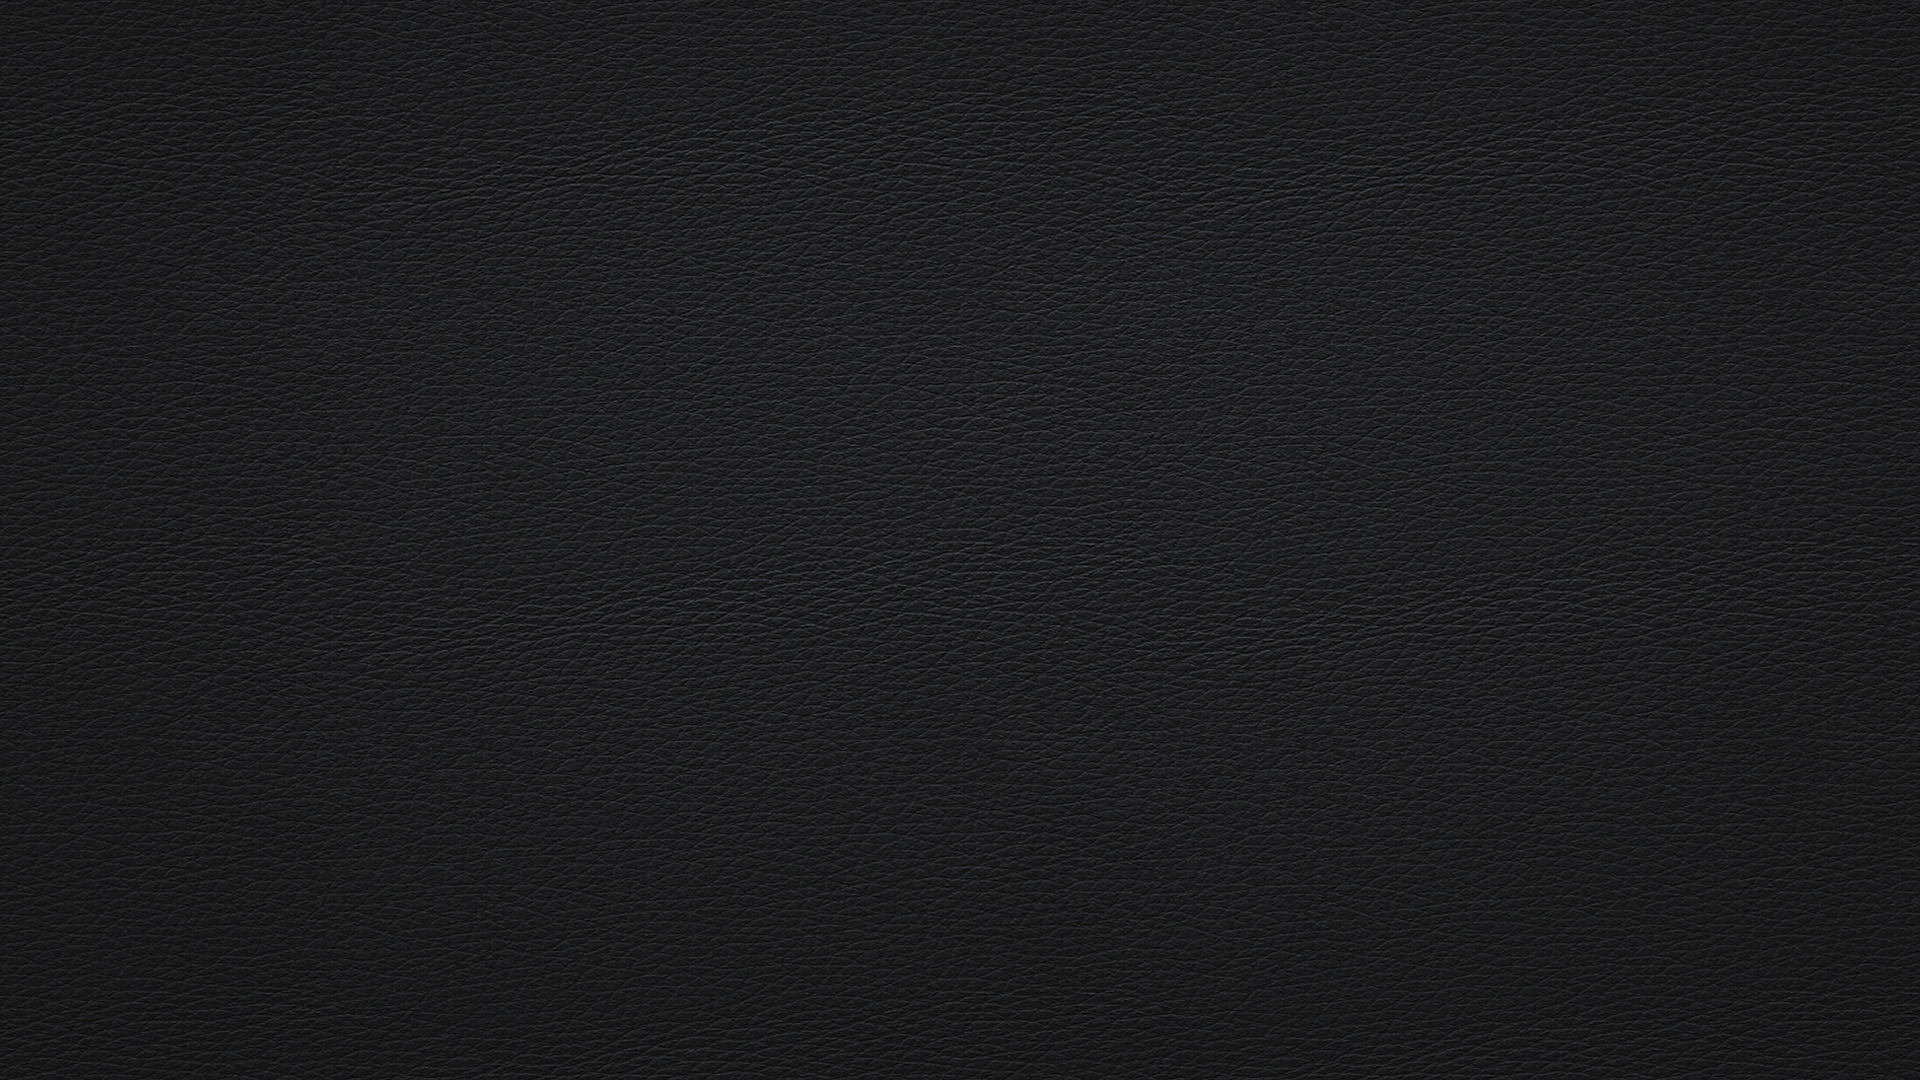 General 1920x1080 abstract texture black leather minimalism